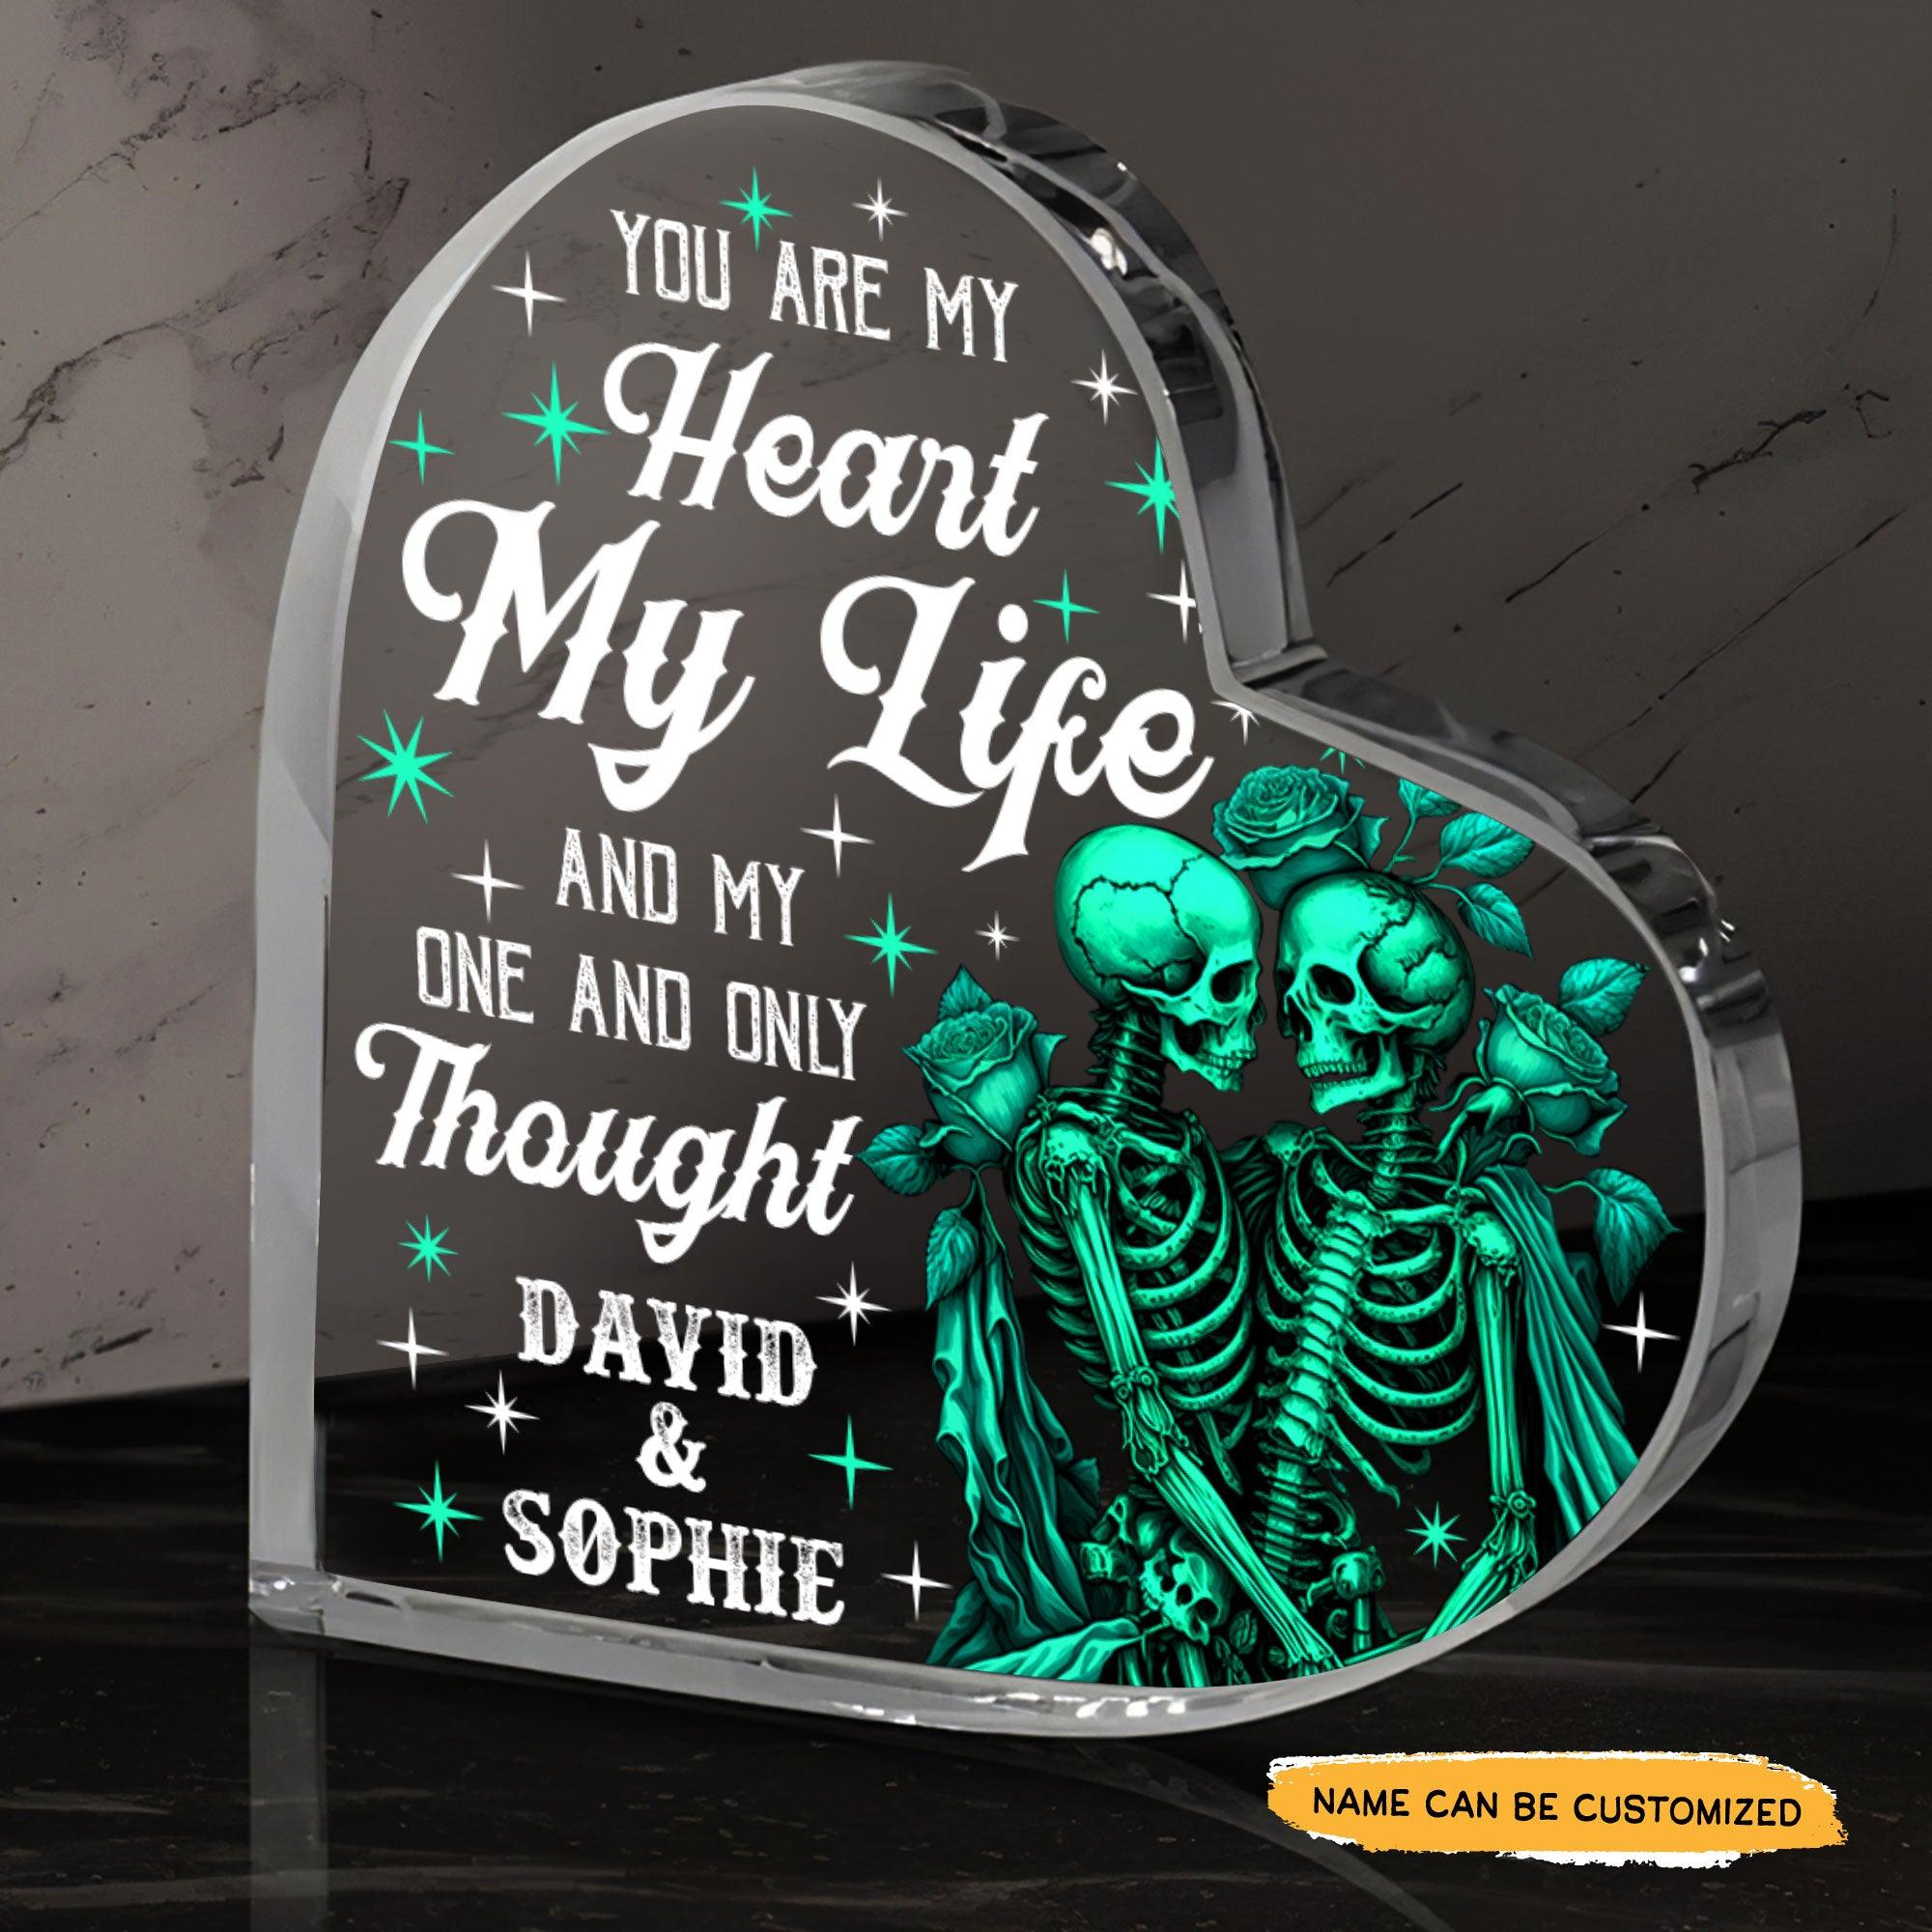 You Are My Heart - Customized Skull Couple Crystal Heart Anniversary Gifts - Wonder Skull